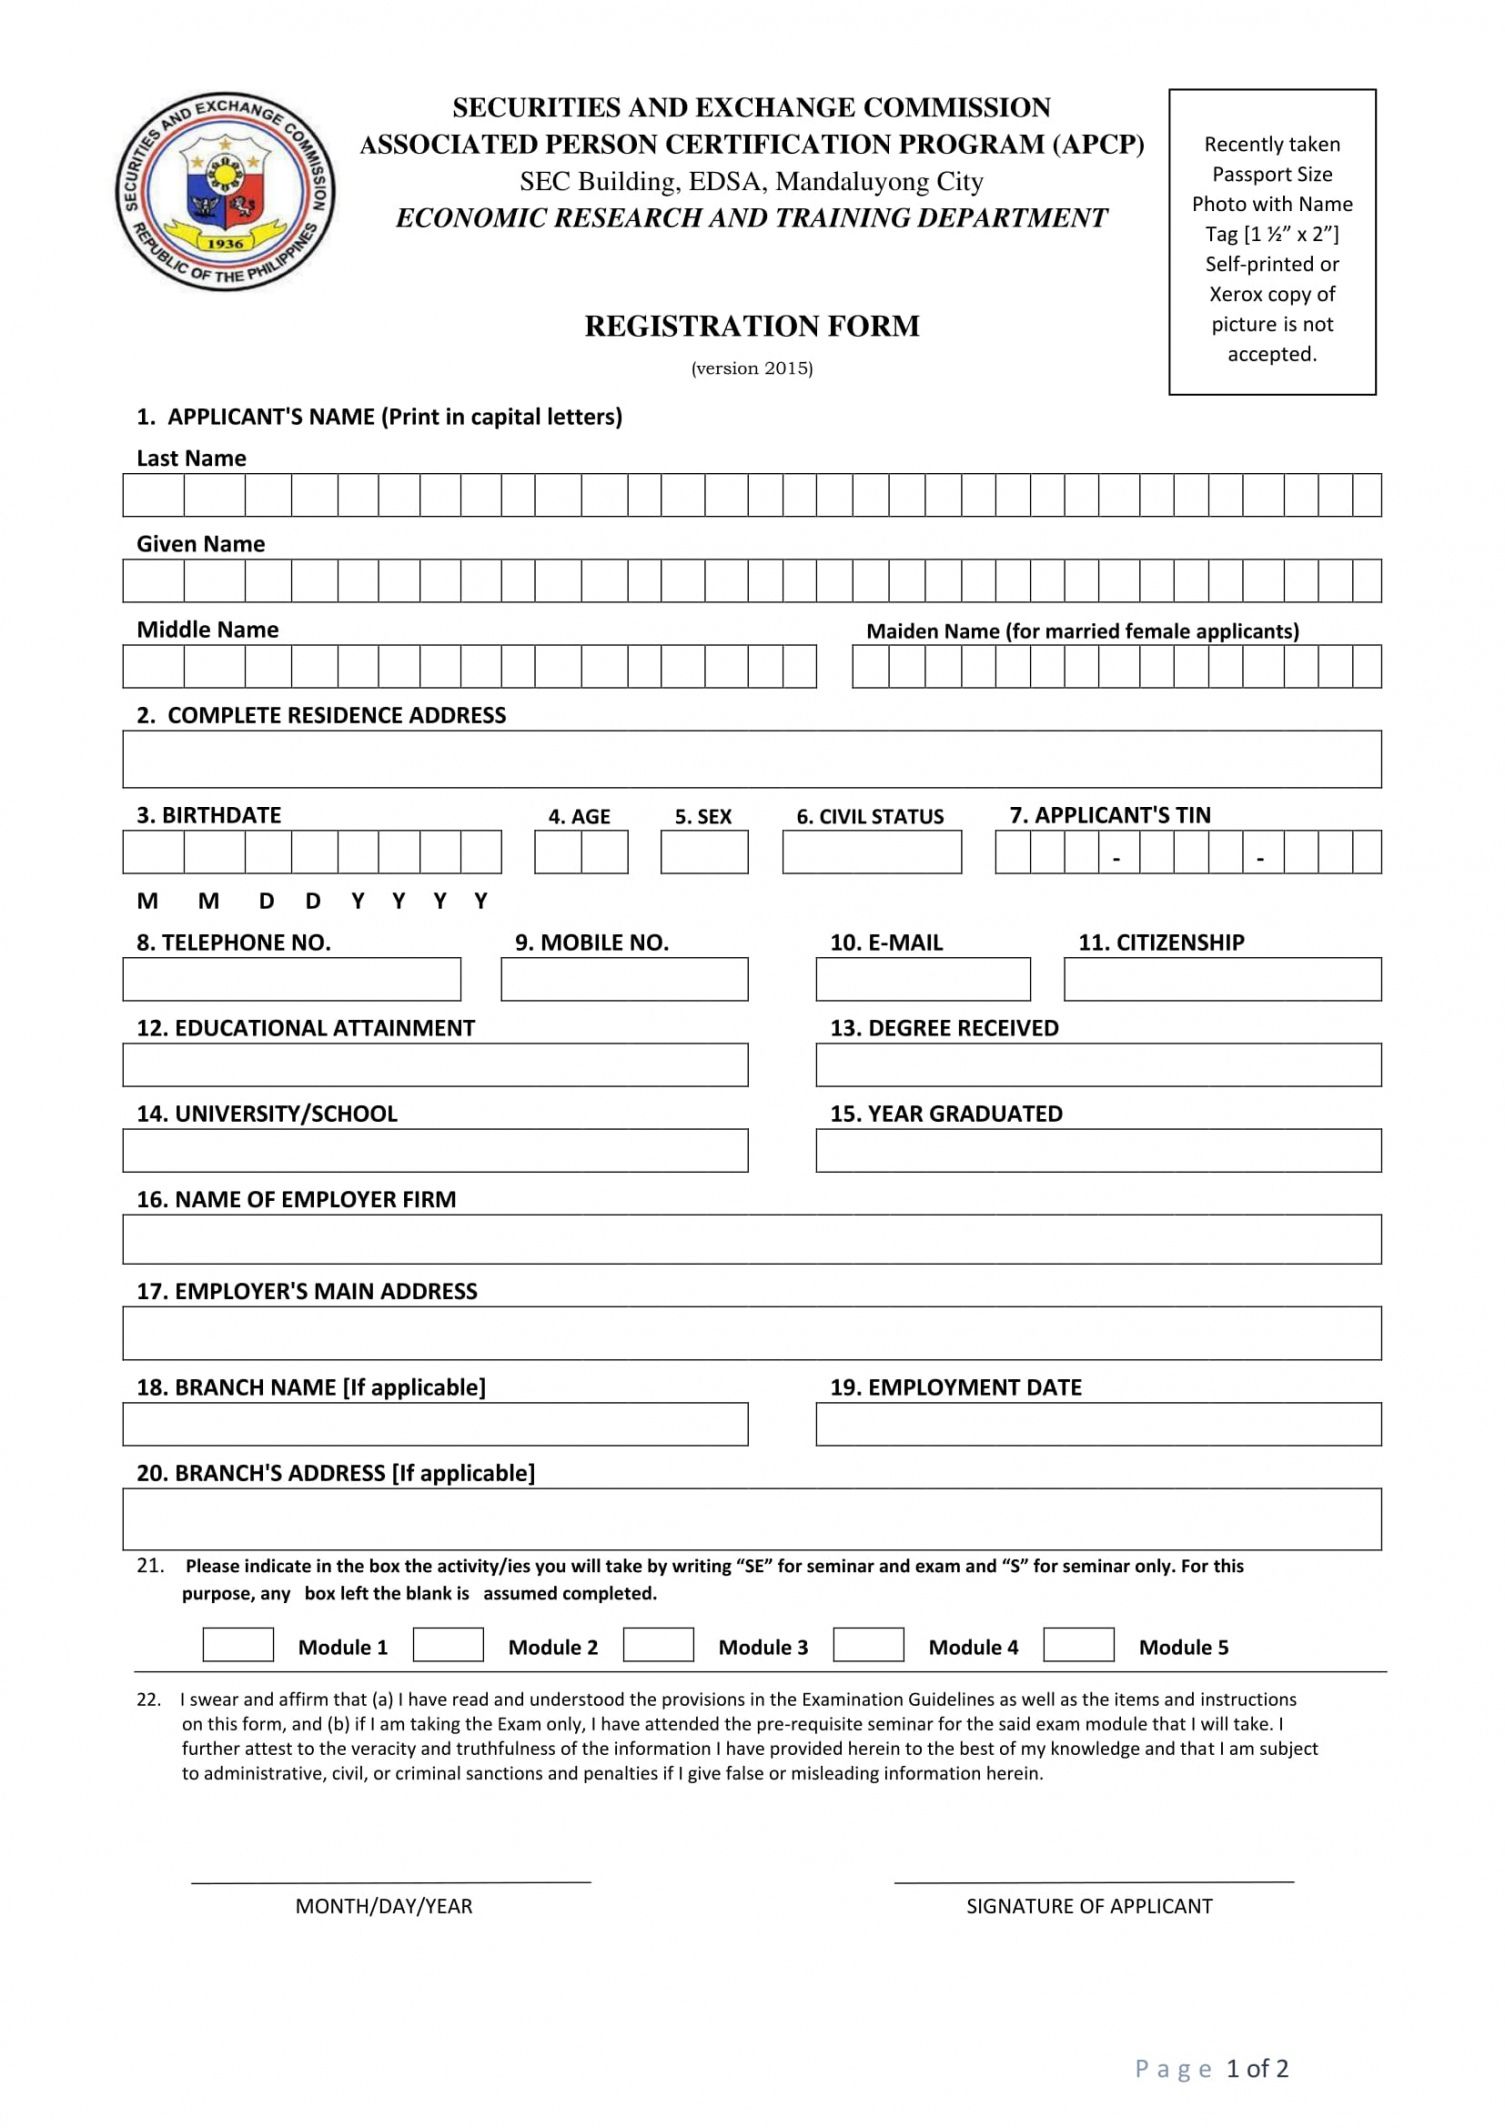 responsive-registration-form-template-free-download-tutore-org